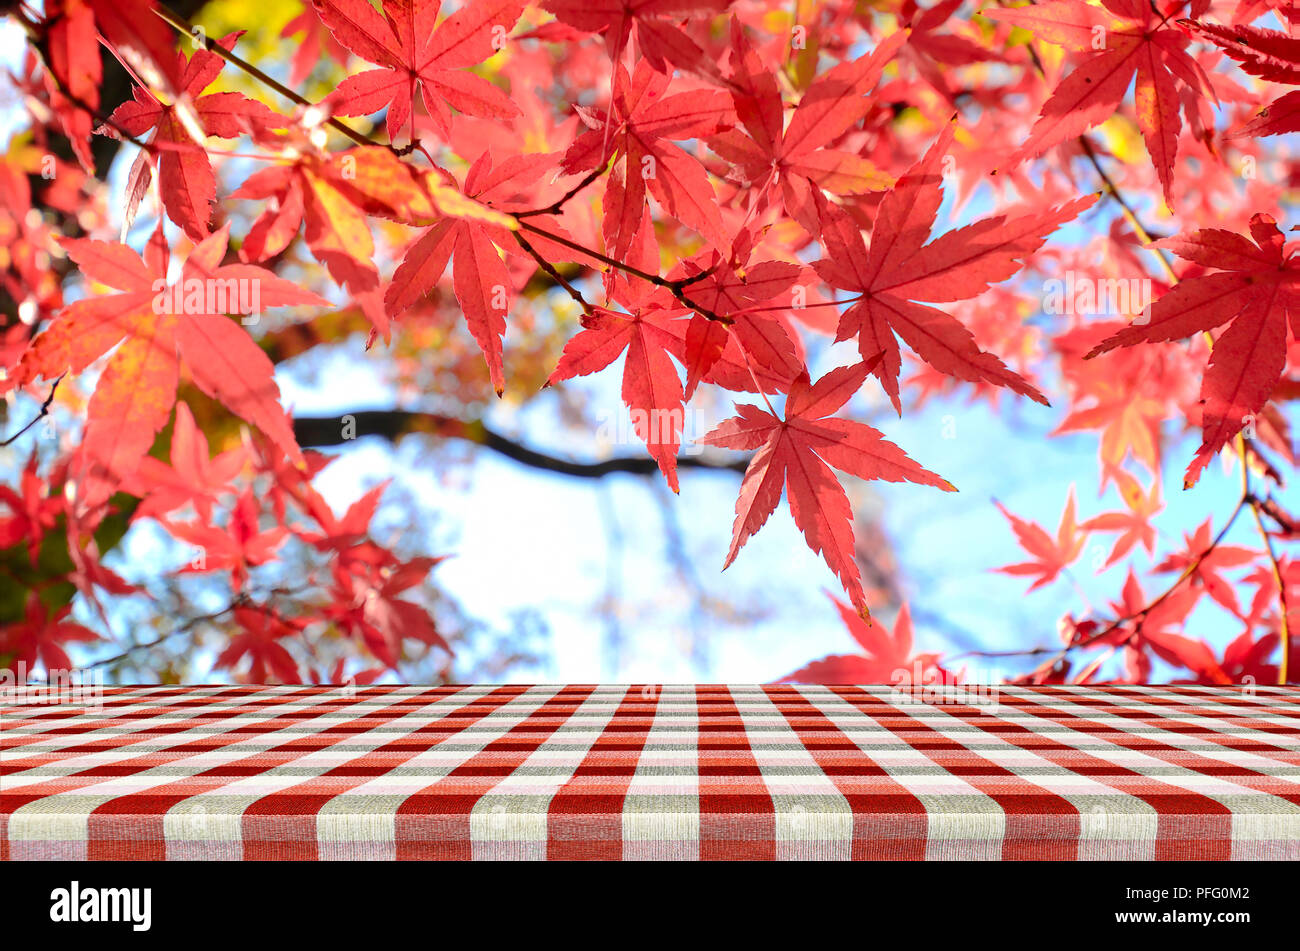 Picnic table with Jananese maple tree garden in autumn. Stock Photo